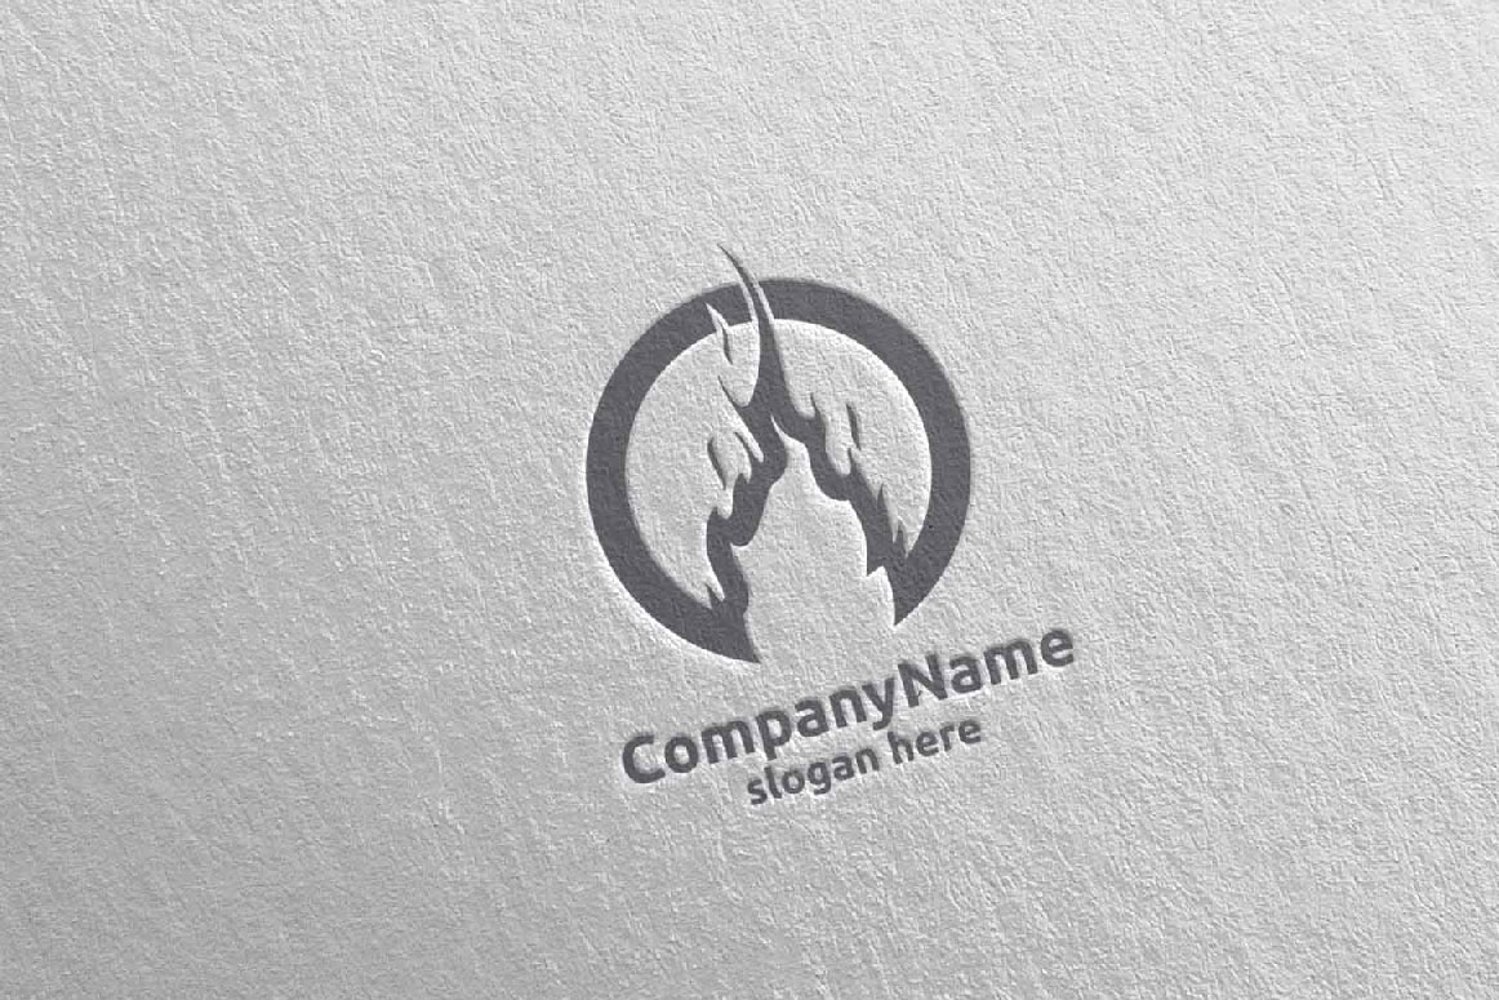 Professionally designed logo in b&w color style.